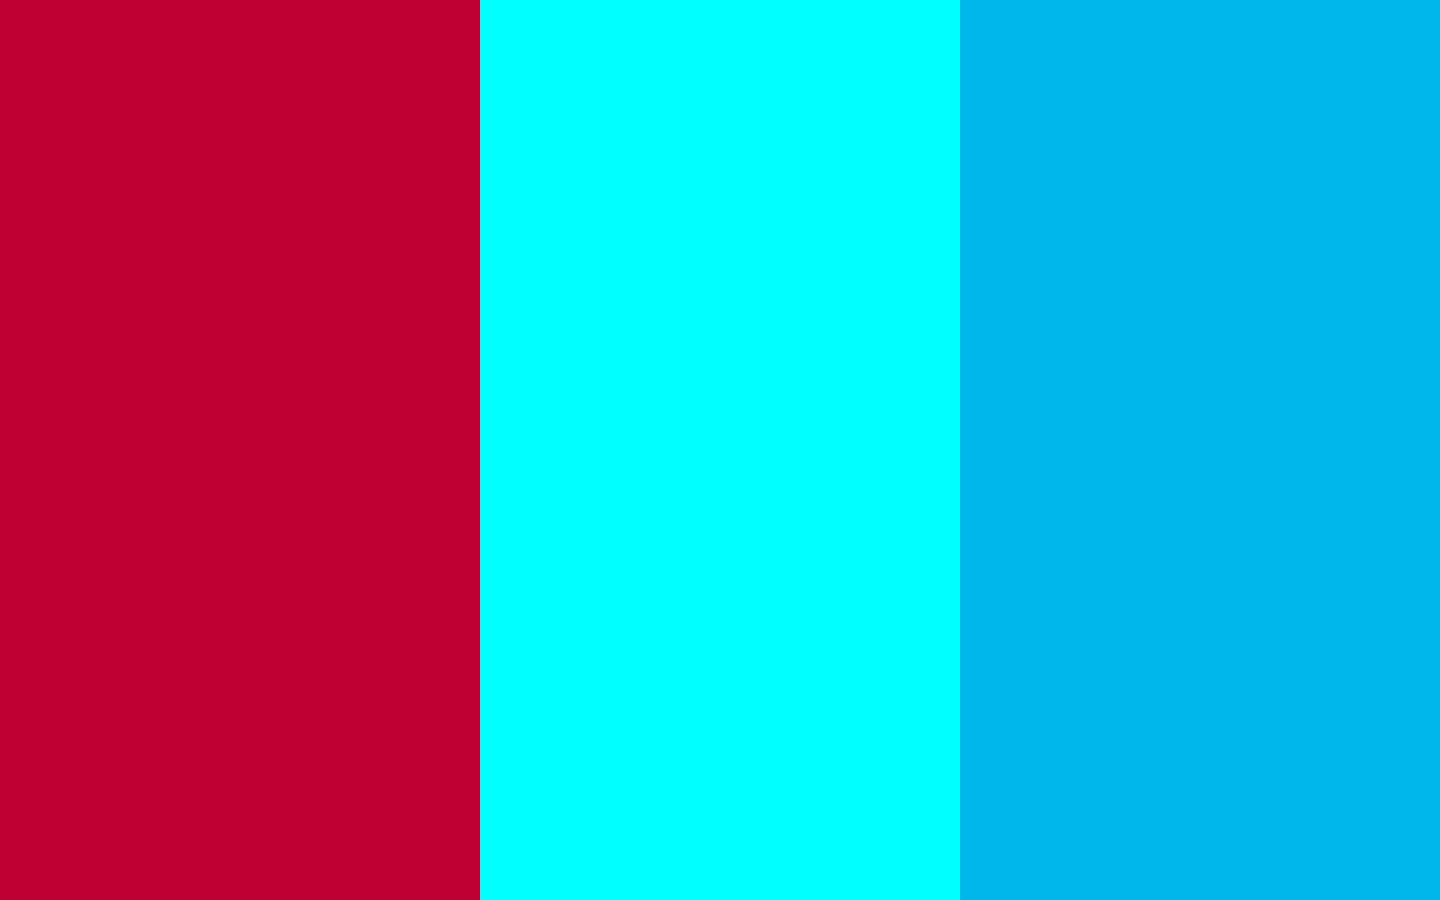 Crimson Glory Cyan and Cyan Process solid three color background